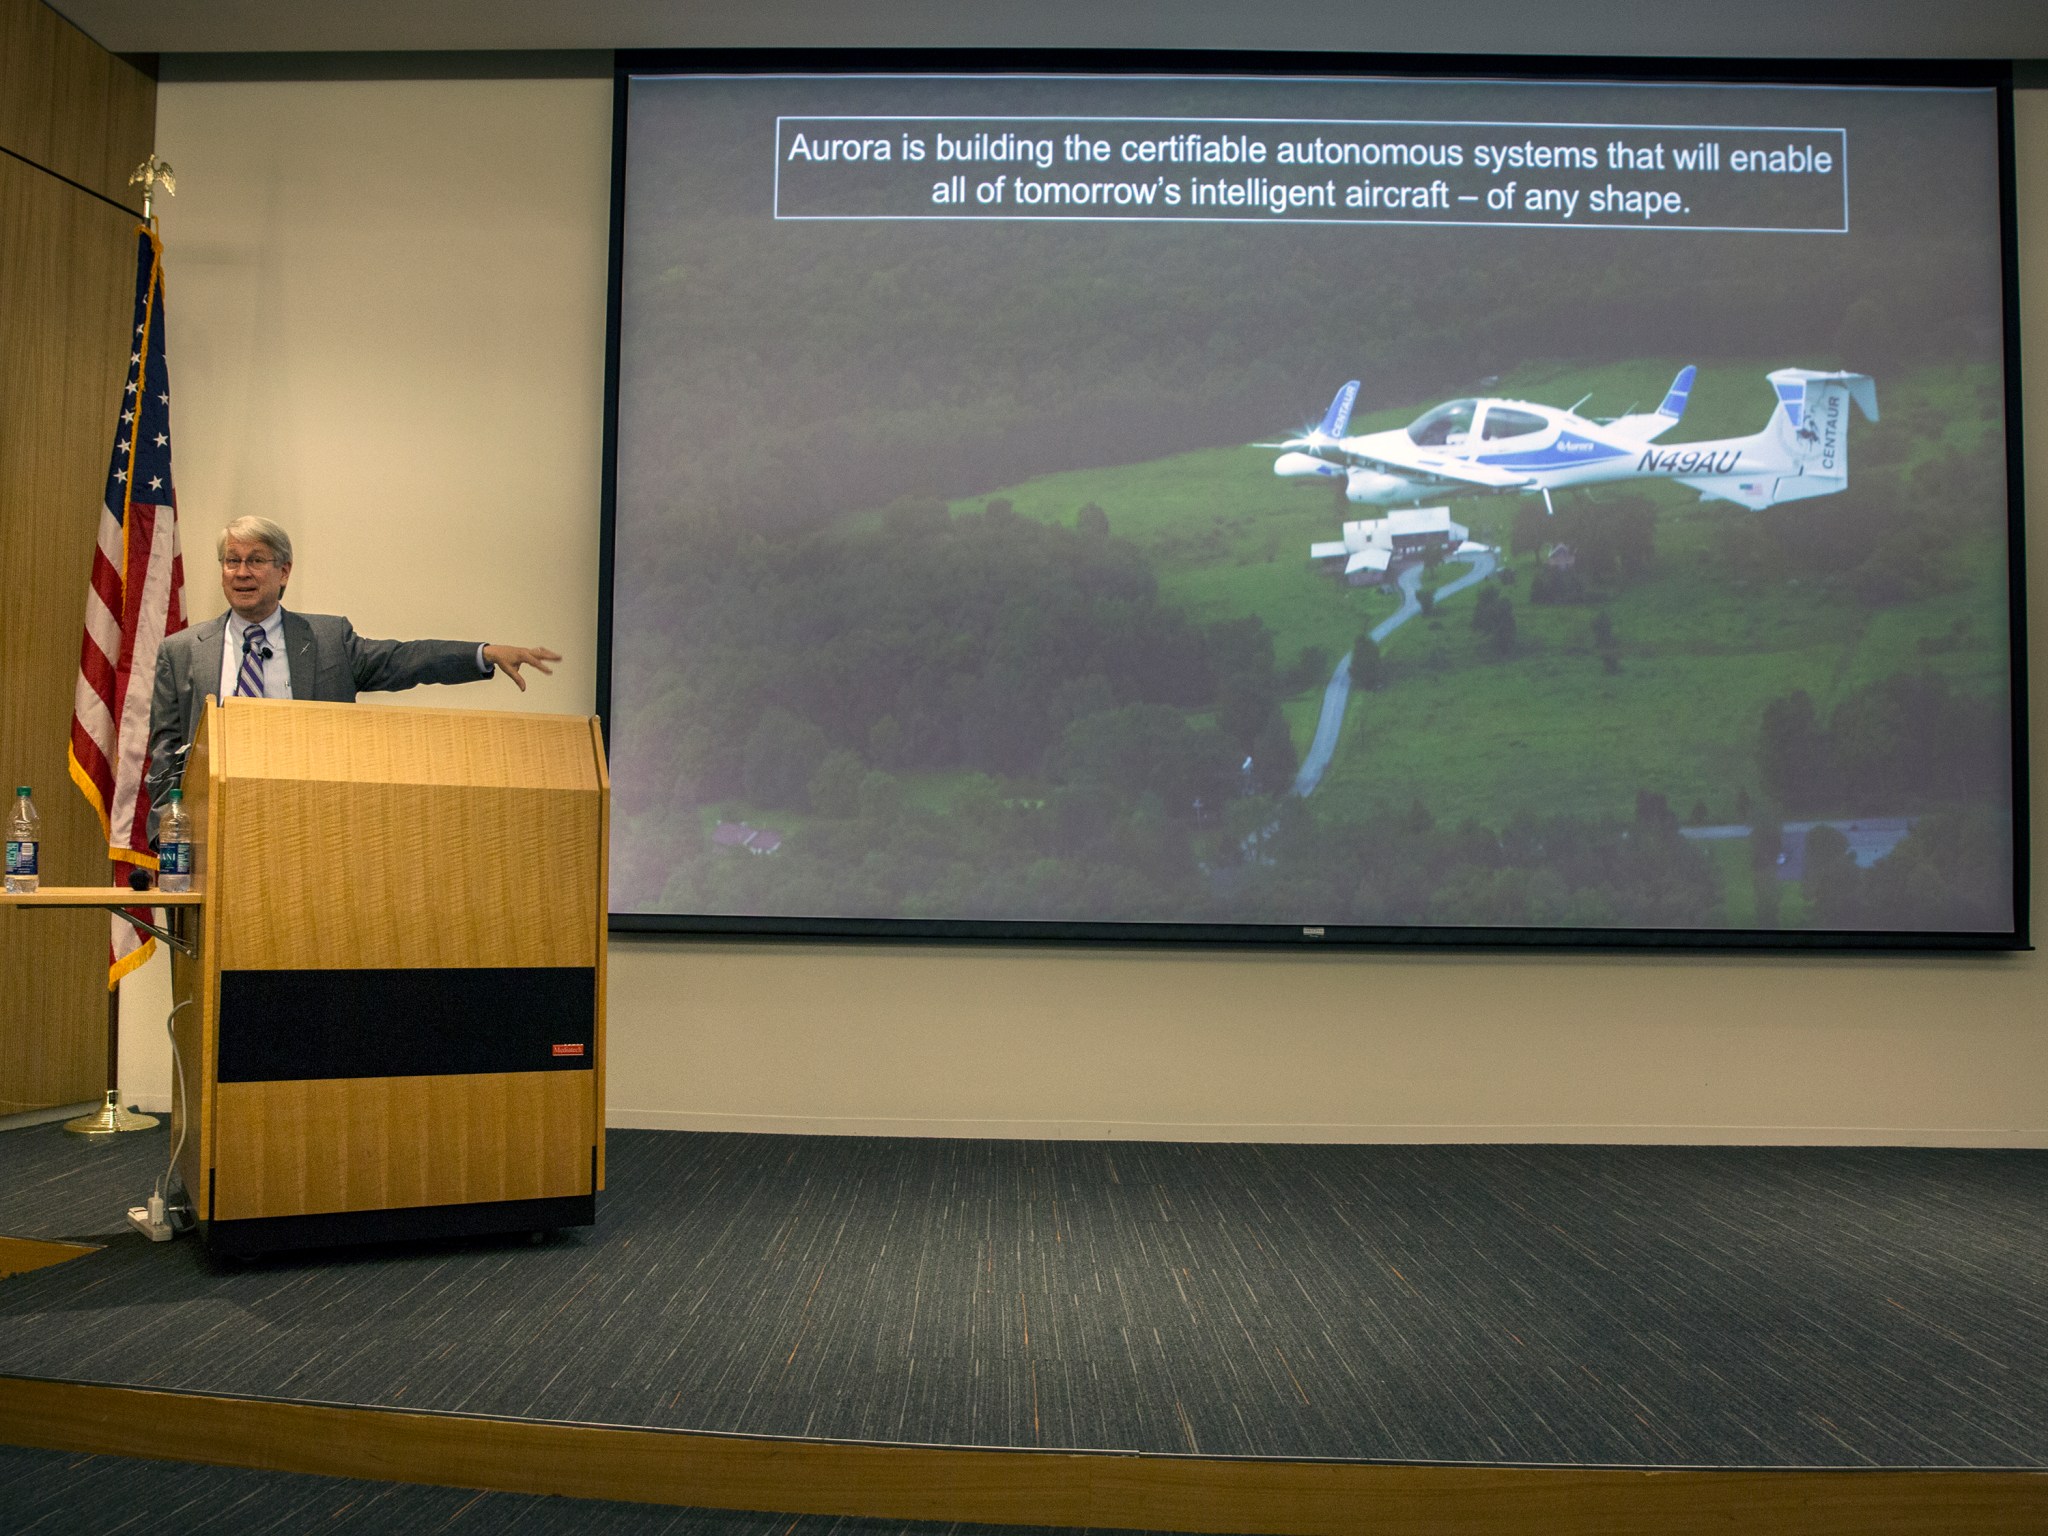 John Langford points to an image of Aurora's Centaur optionally piloted aircraft.